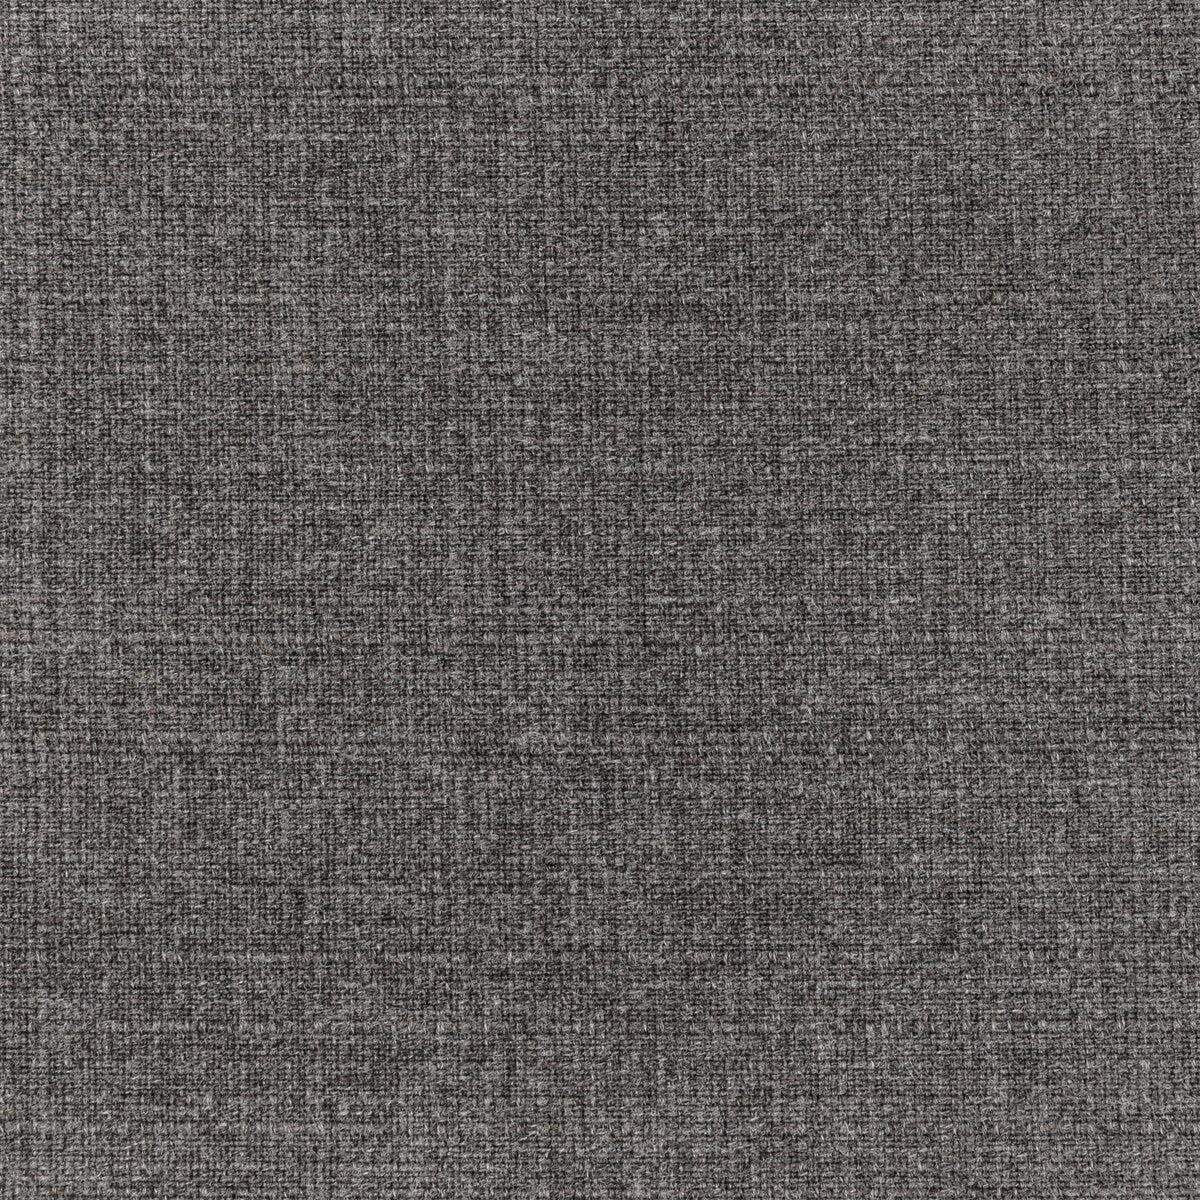 Kravet Basics fabric in 36821-21 color - pattern 36821.21.0 - by Kravet Basics in the Indoor / Outdoor collection